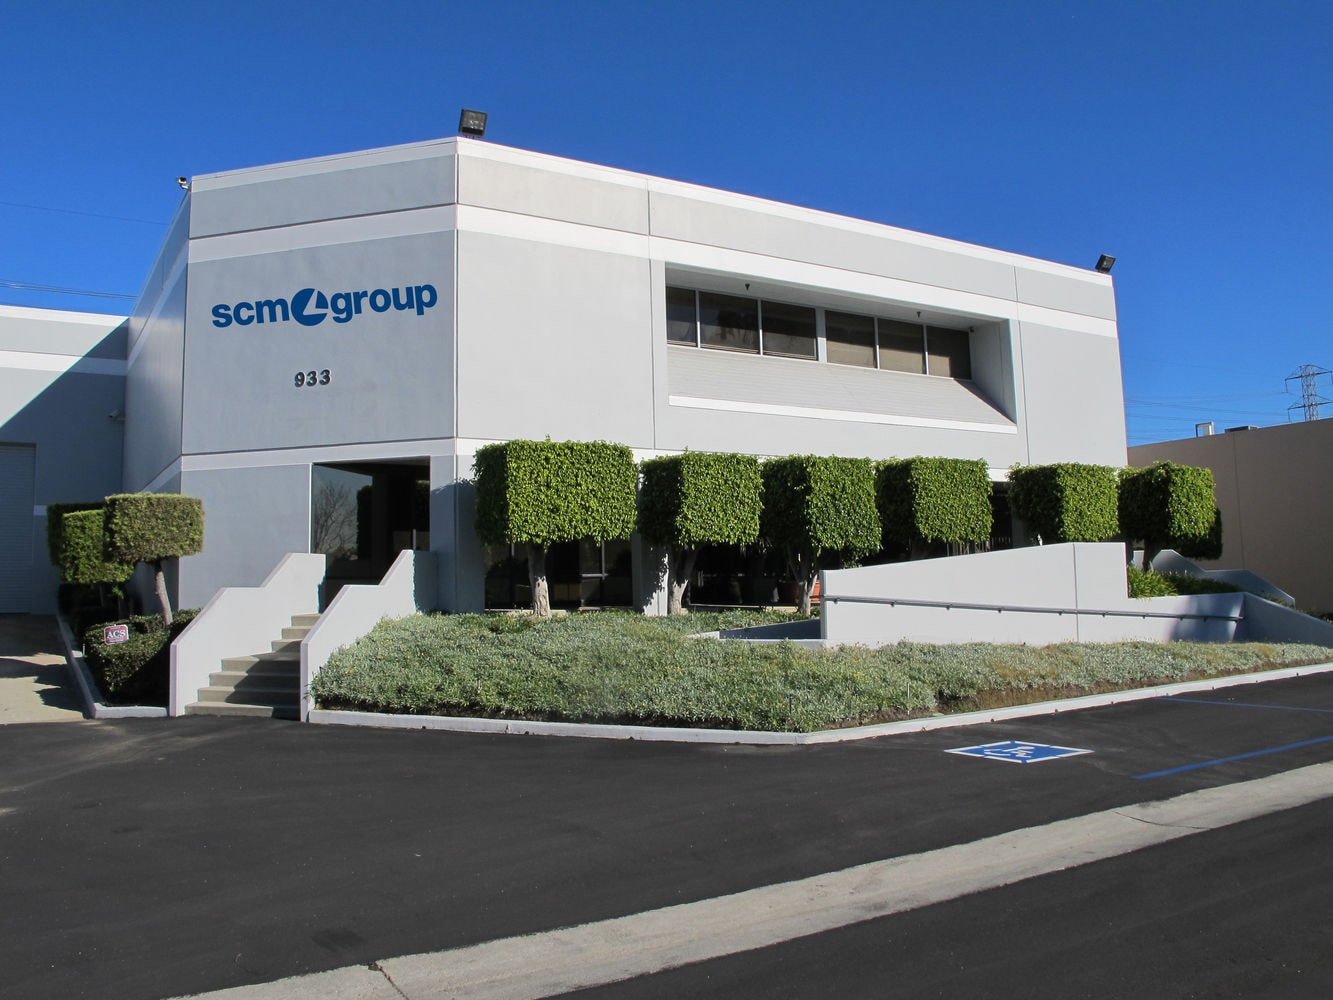 Grand Opening of the new Scm Group branch in California